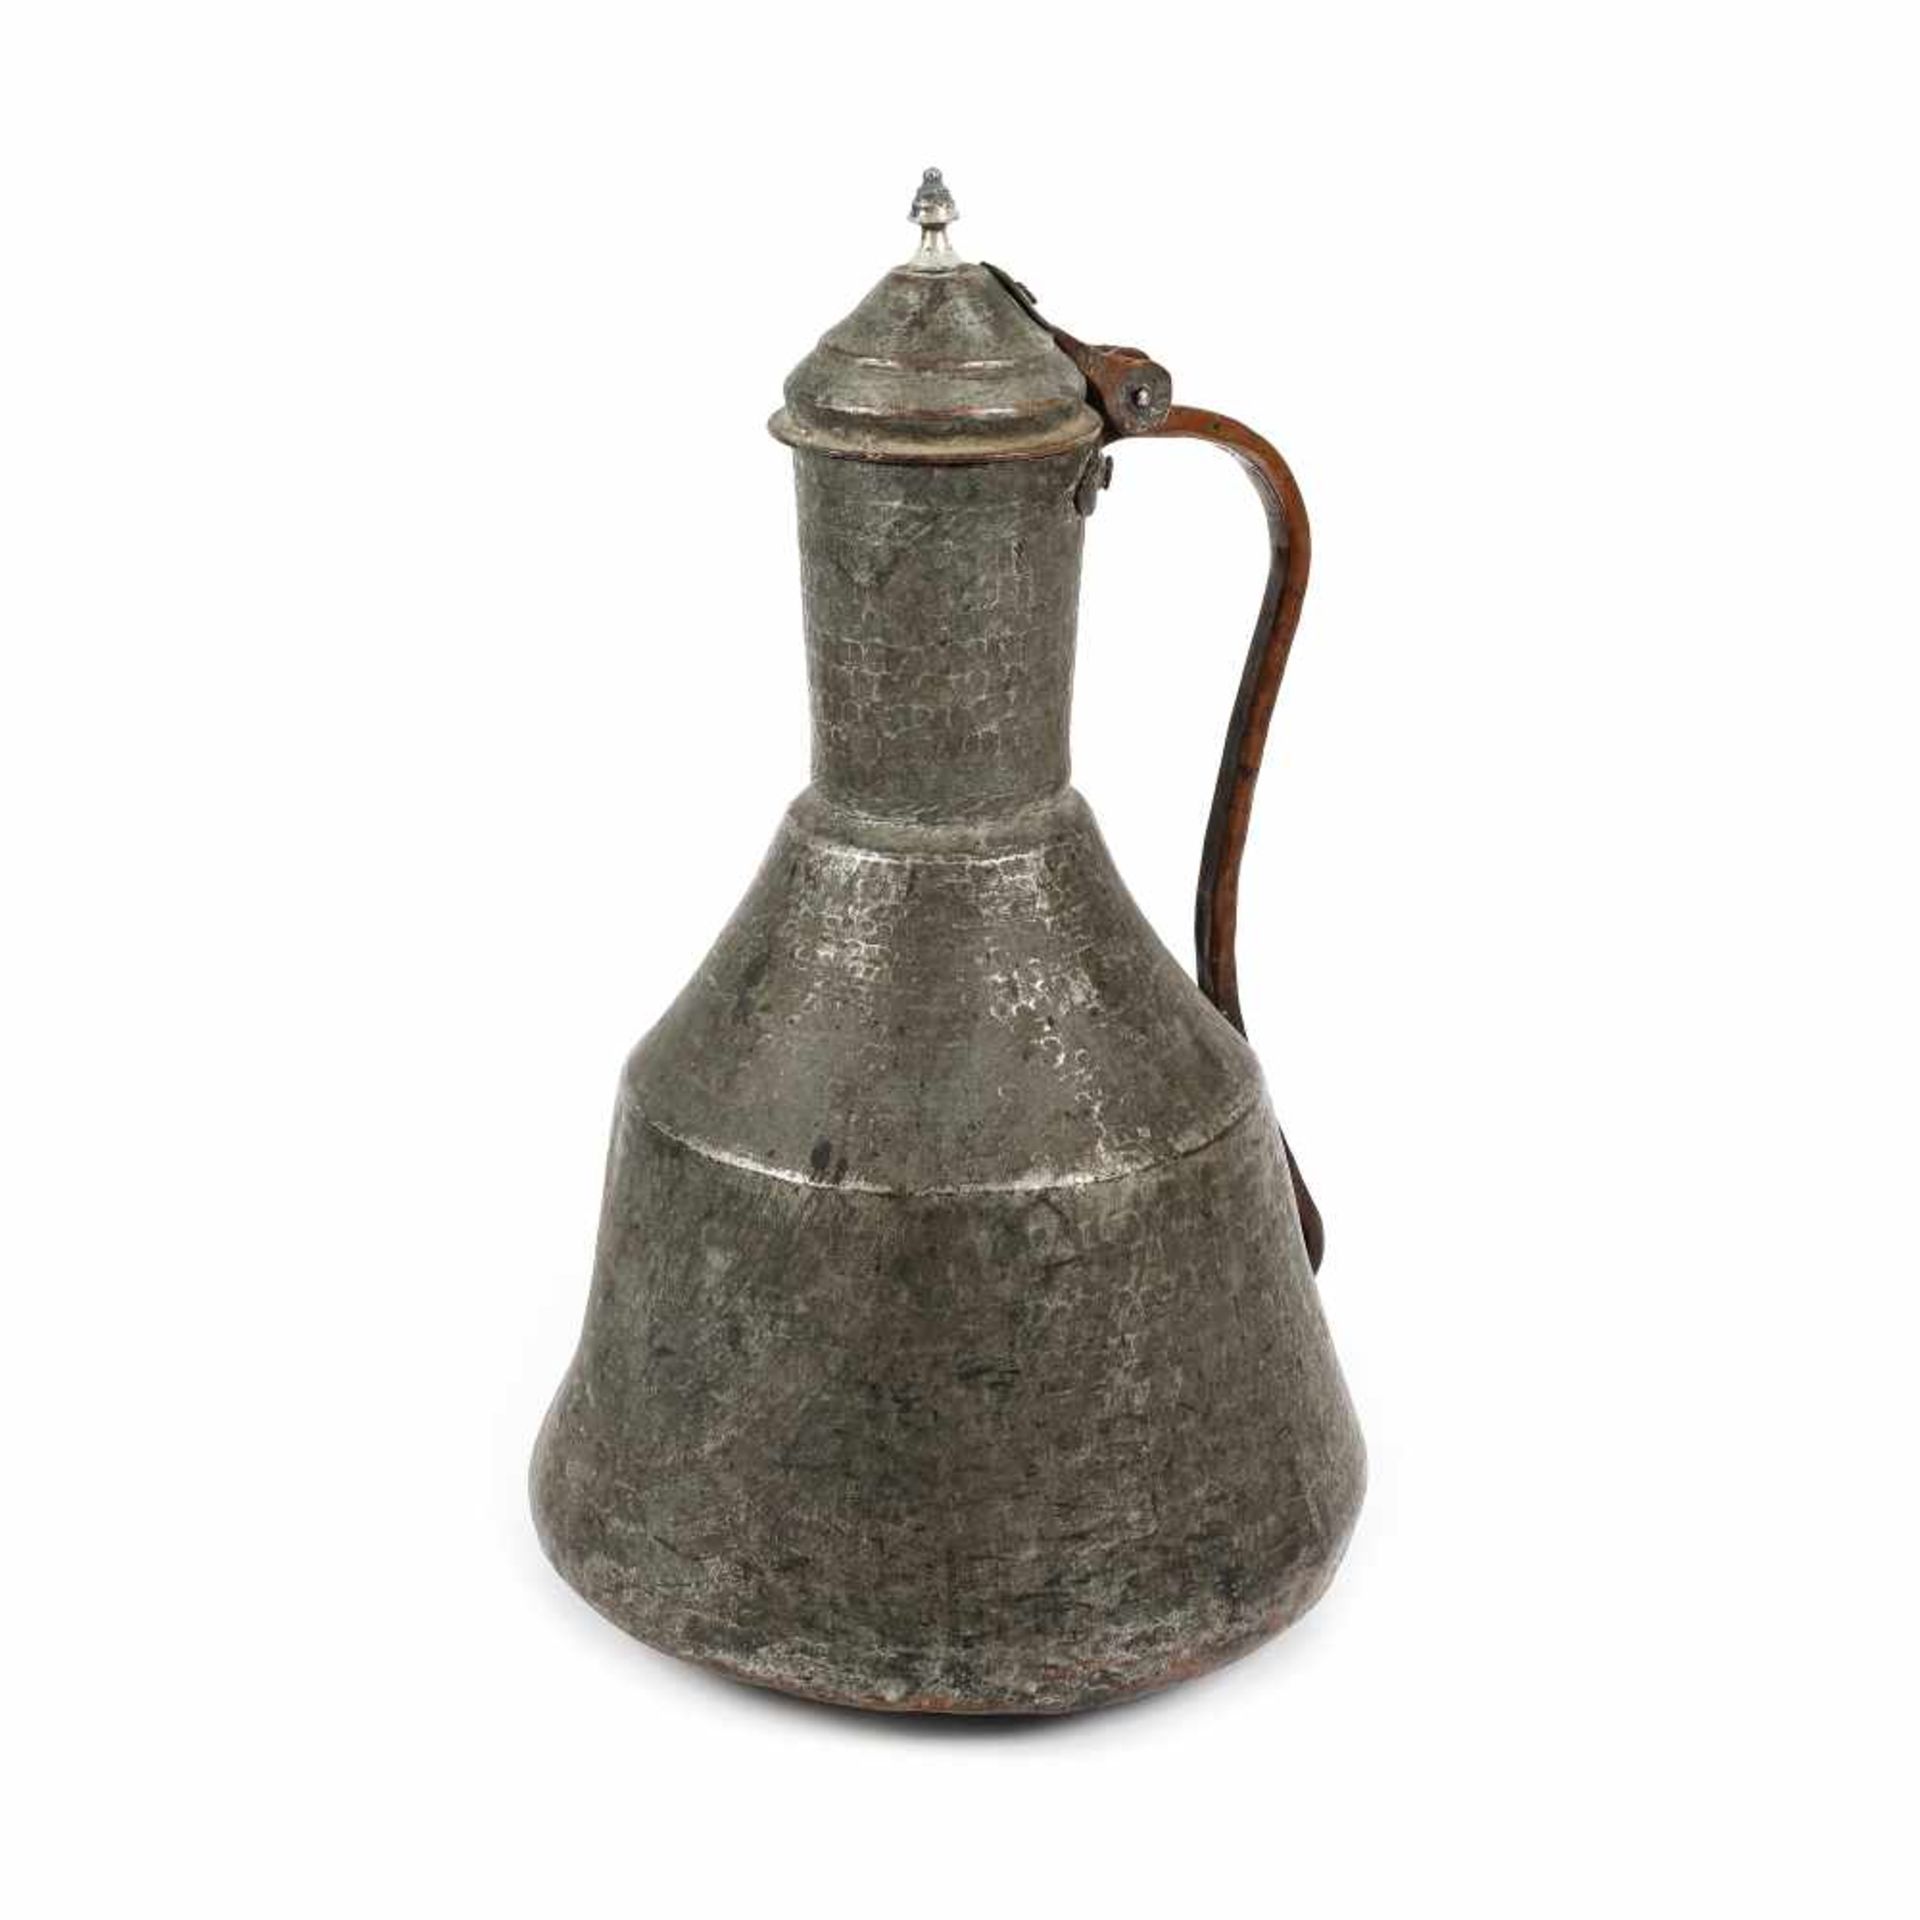 Macedonian silver-plated copper vessel for water, late 19th century